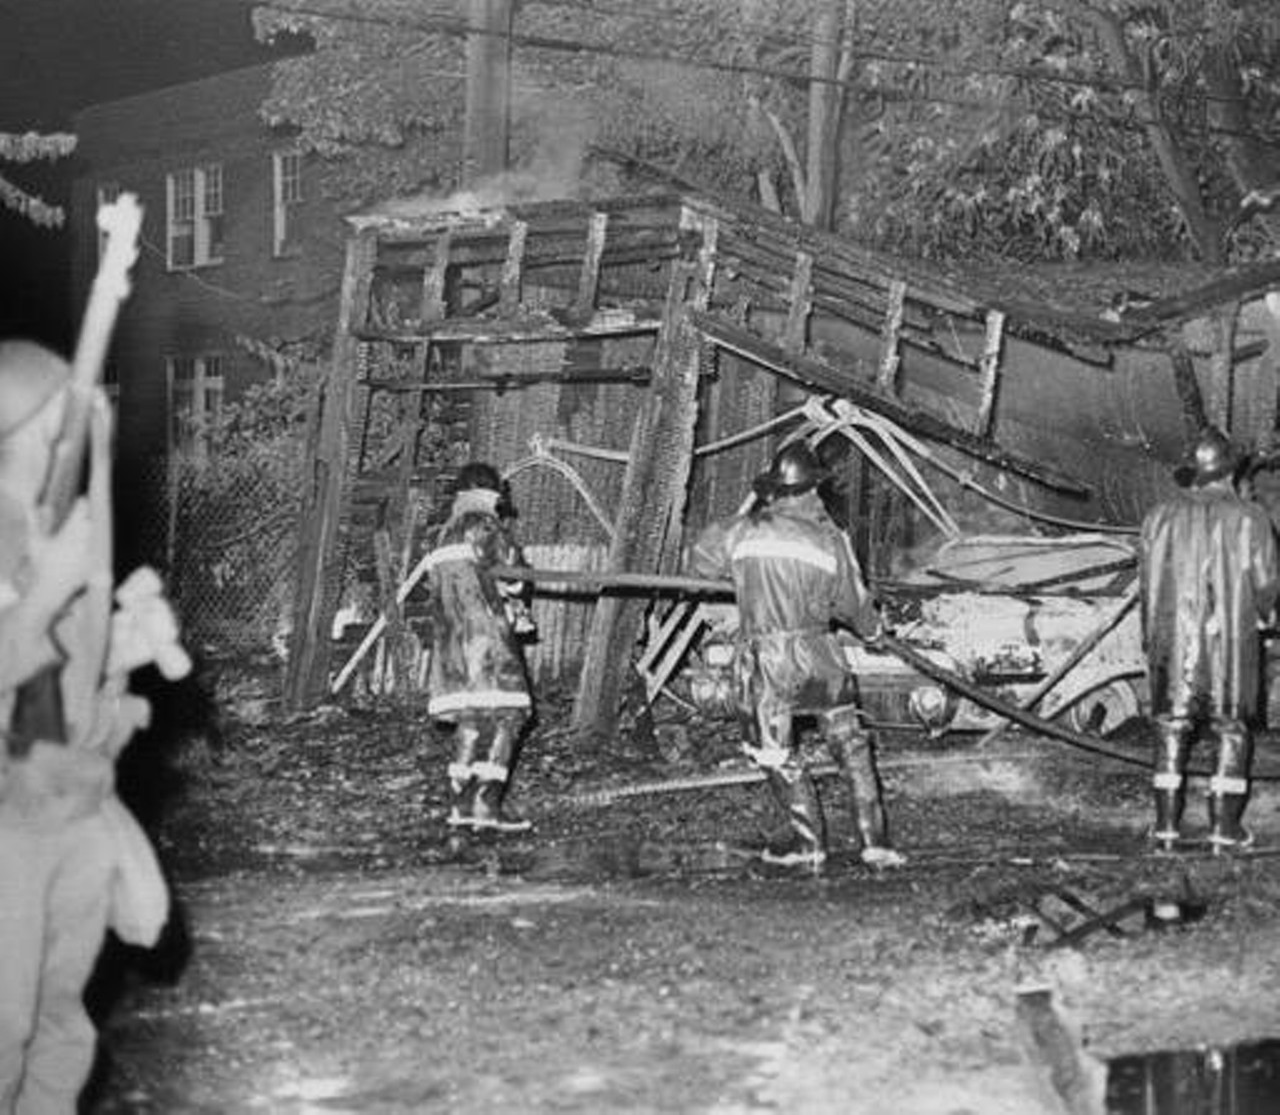 A home at 2028 East 88th Street, destroyed by fire during the Hough riots of 1966